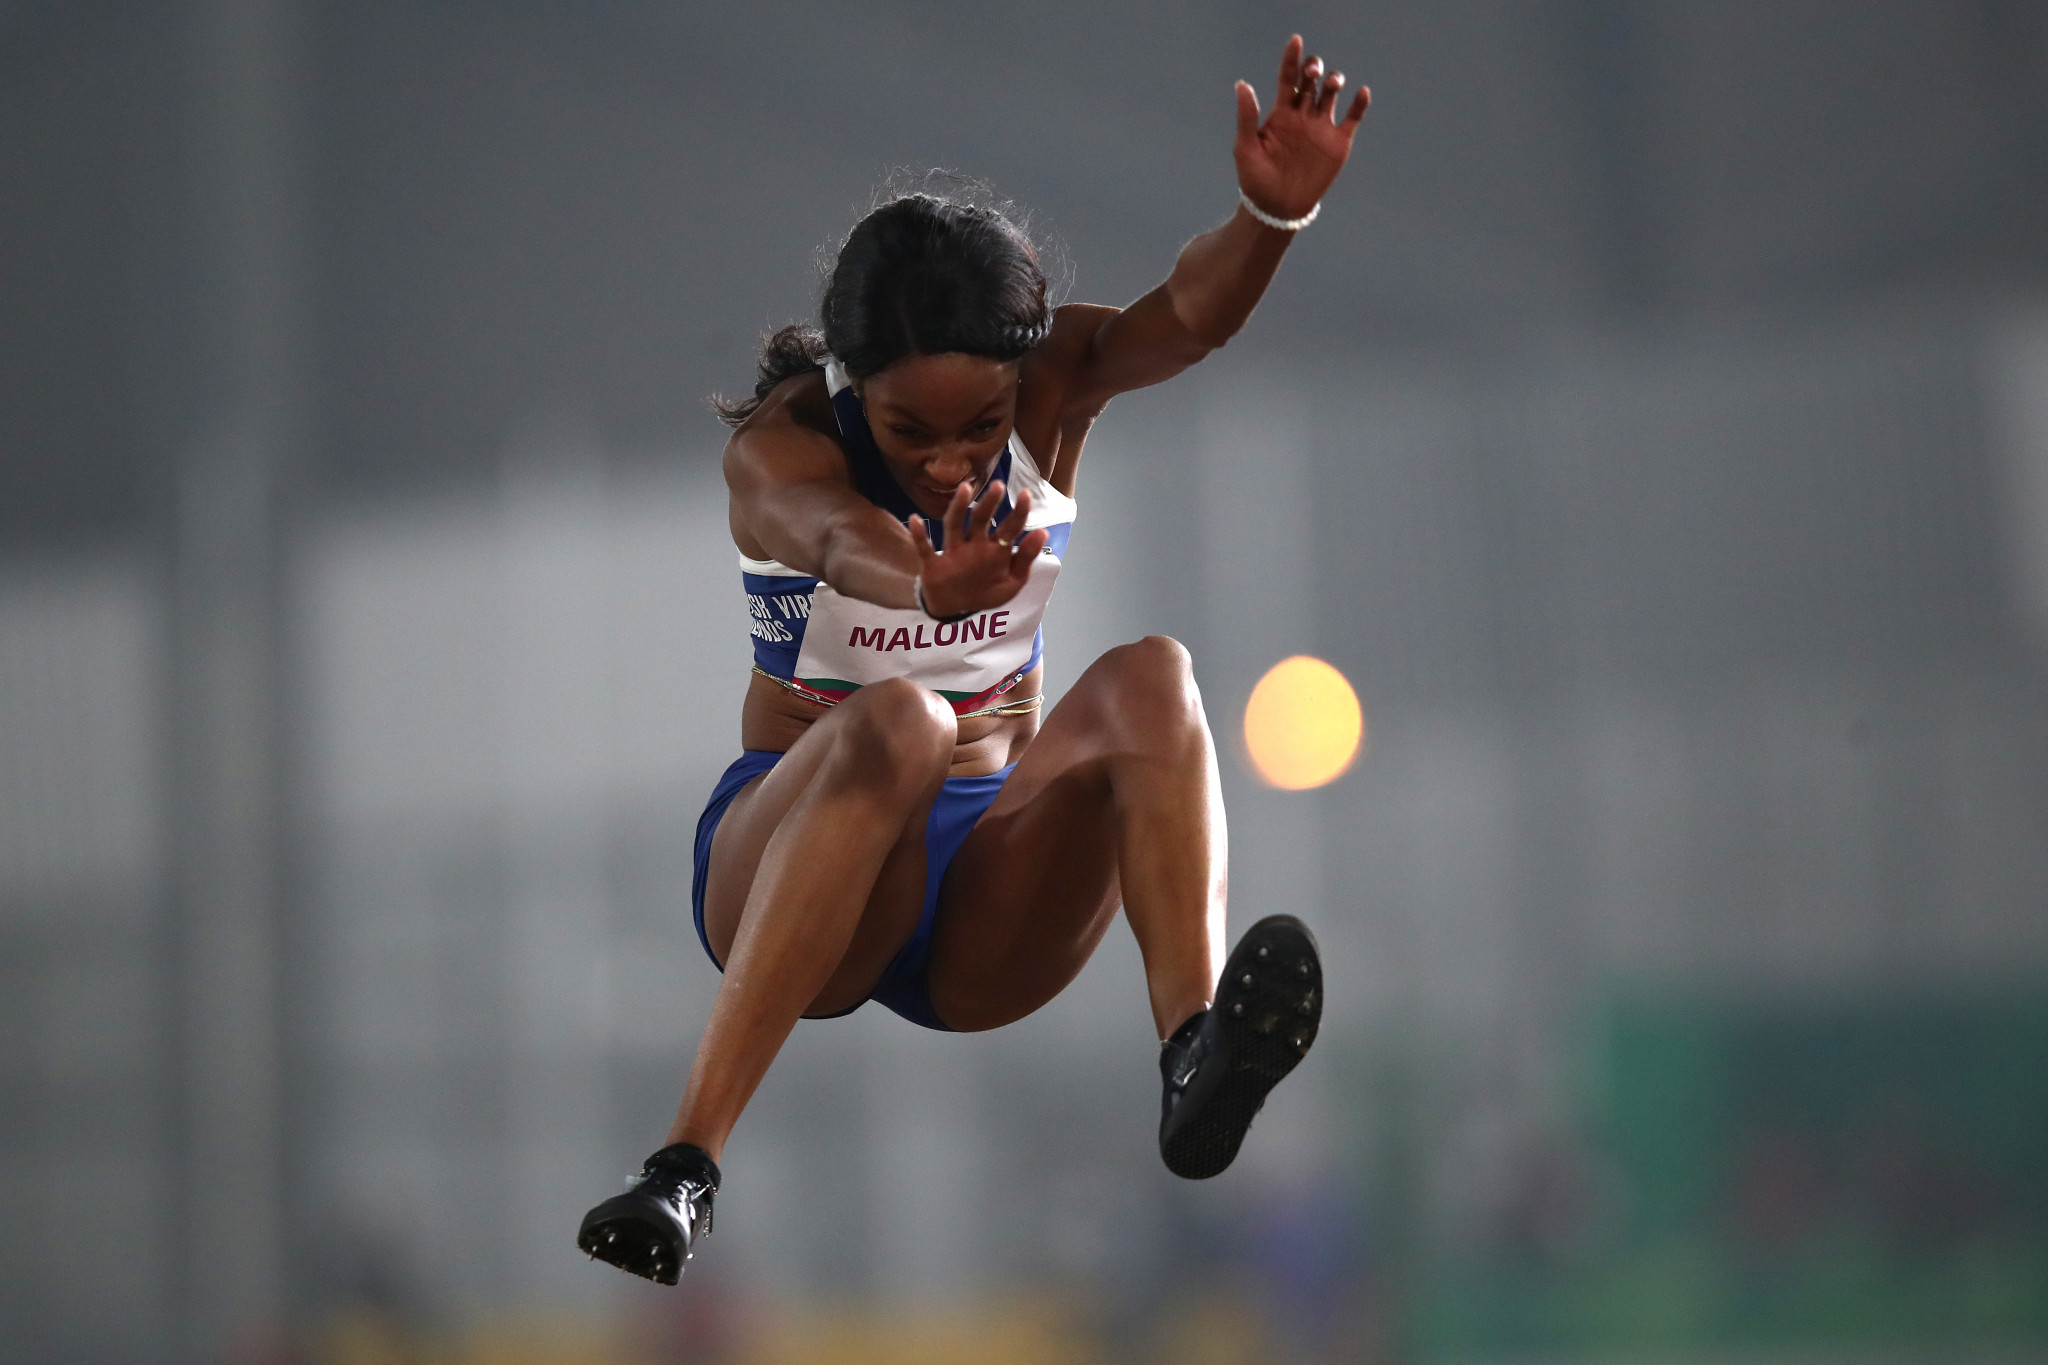 Pan American Games champion Chantel Malone was one of the athletes involved ©Getty Images